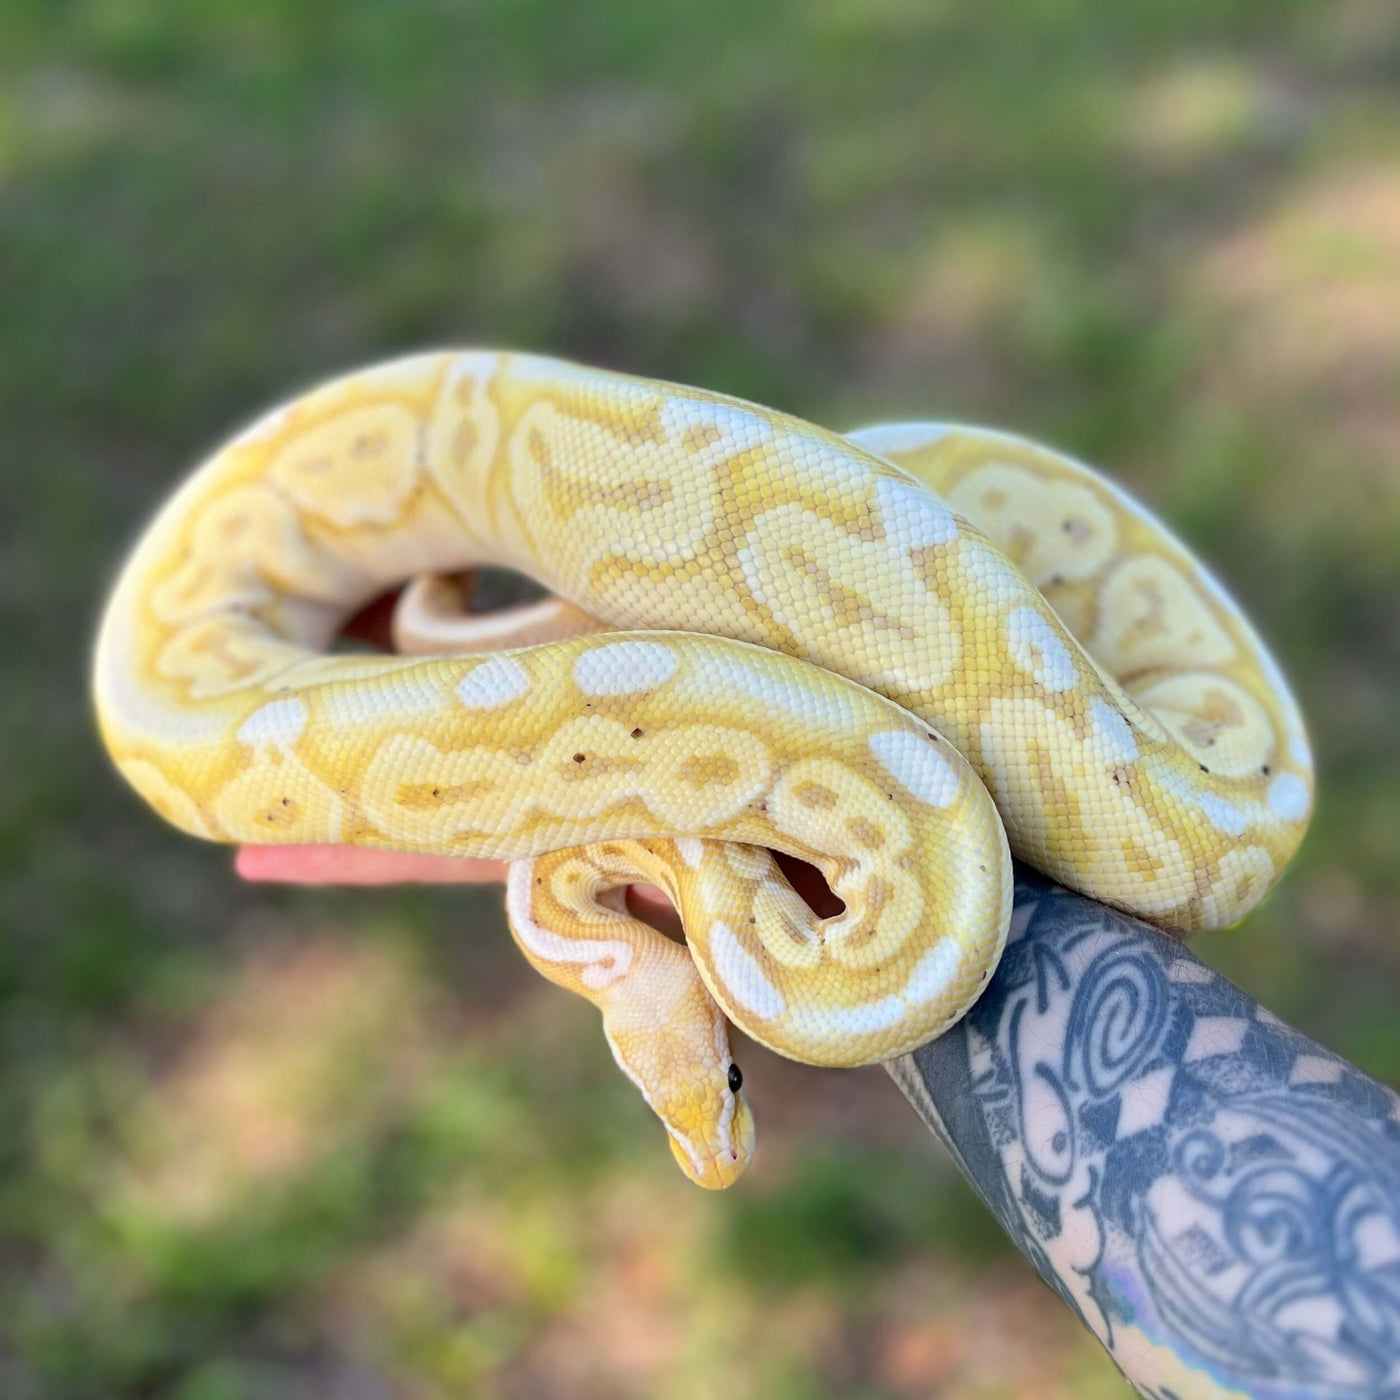 banana pewter ball python for sale online at cheap prices, buy ball pythons near me